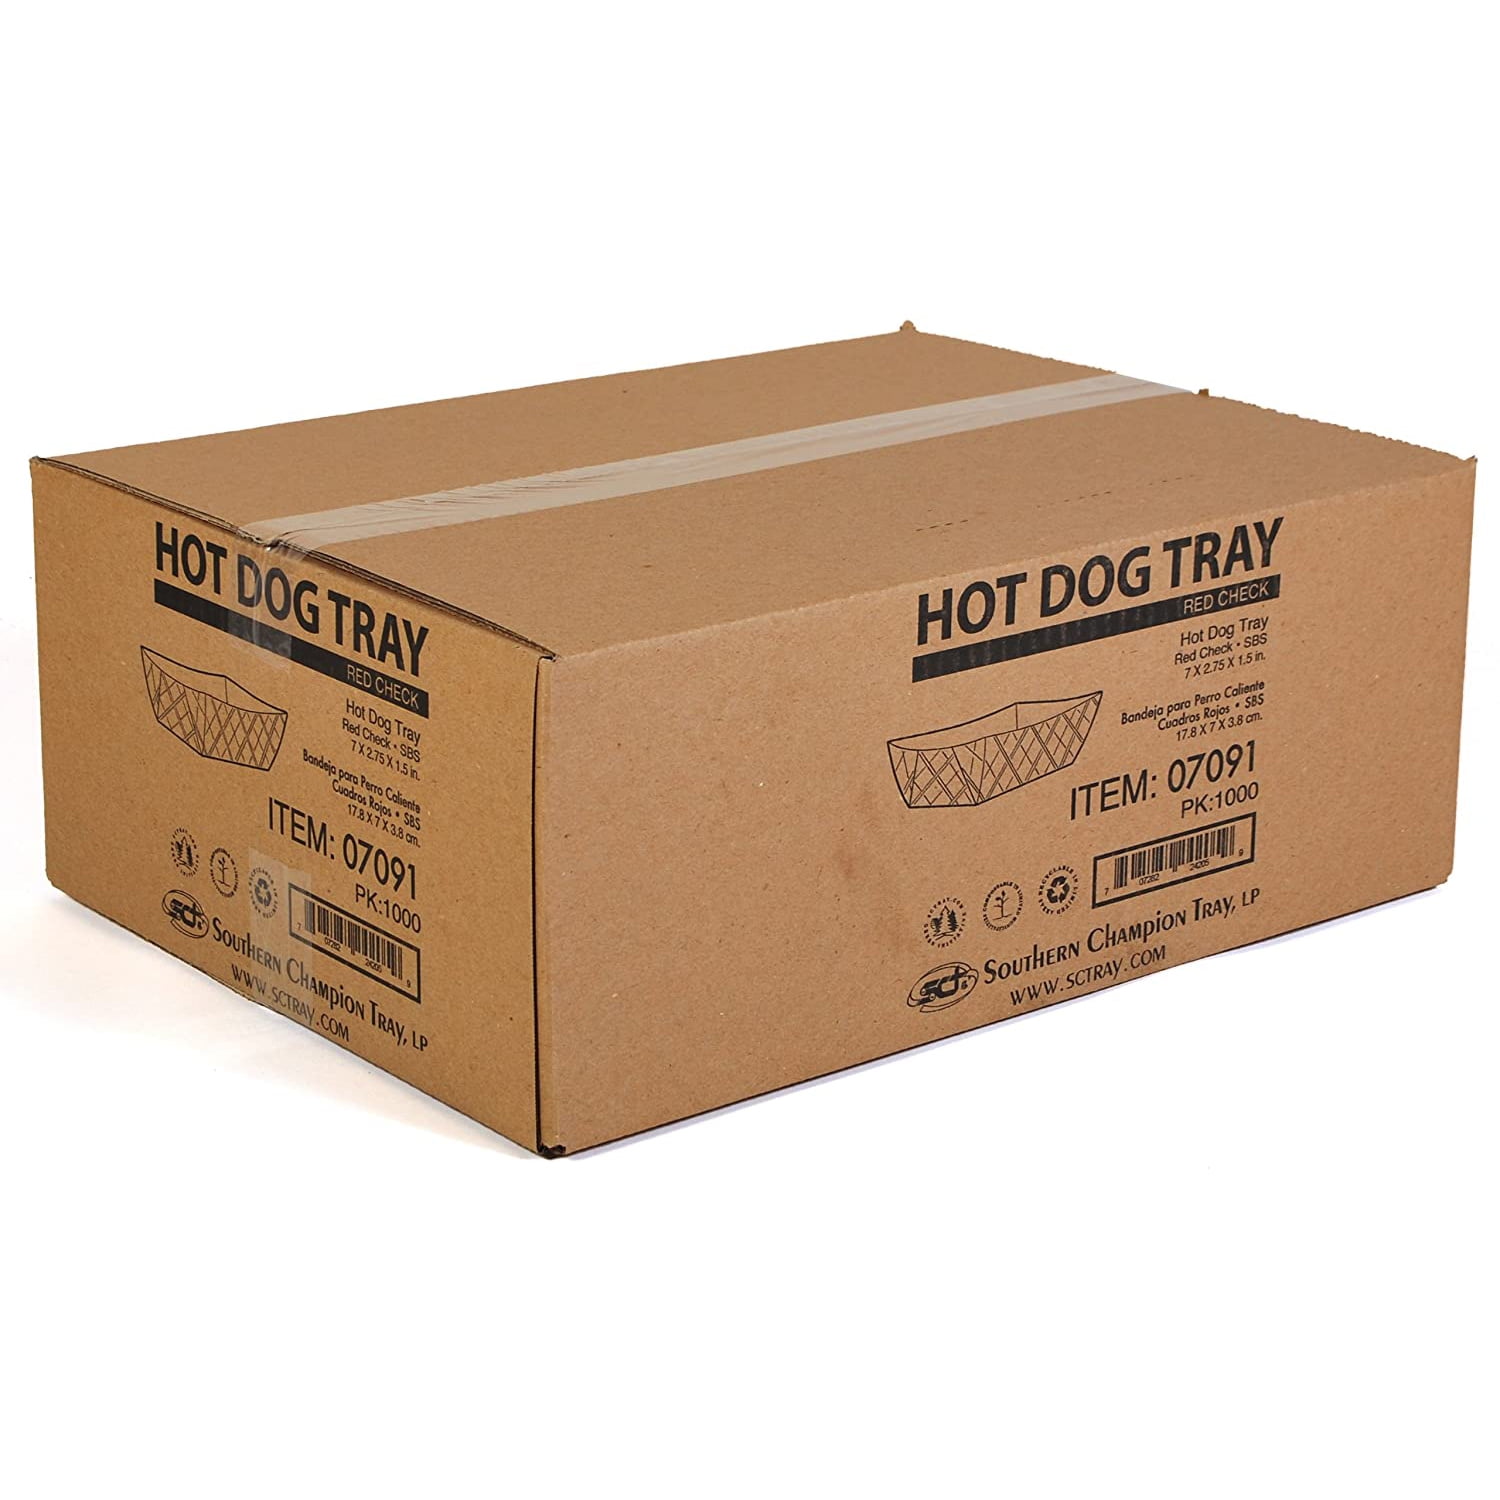 0 Hot Dog Tray Nested Paper, Red Check - Case Of 1000